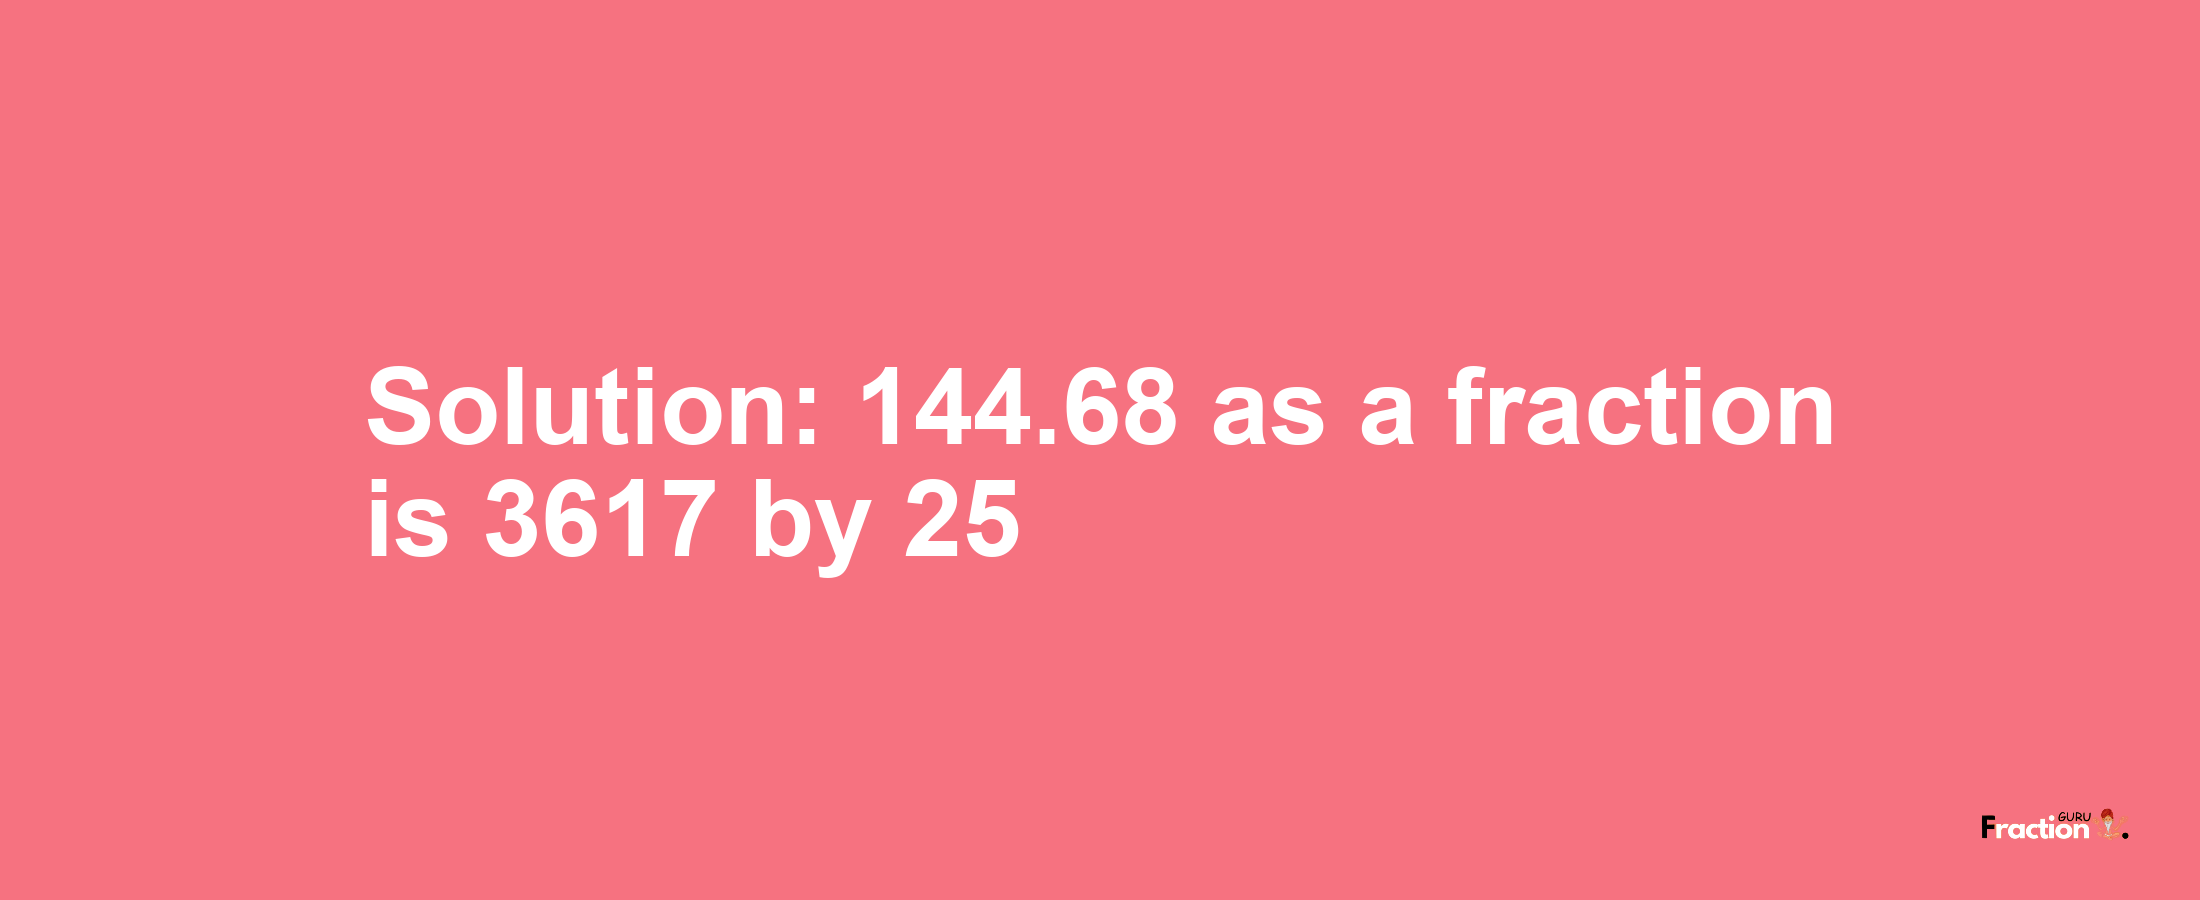 Solution:144.68 as a fraction is 3617/25